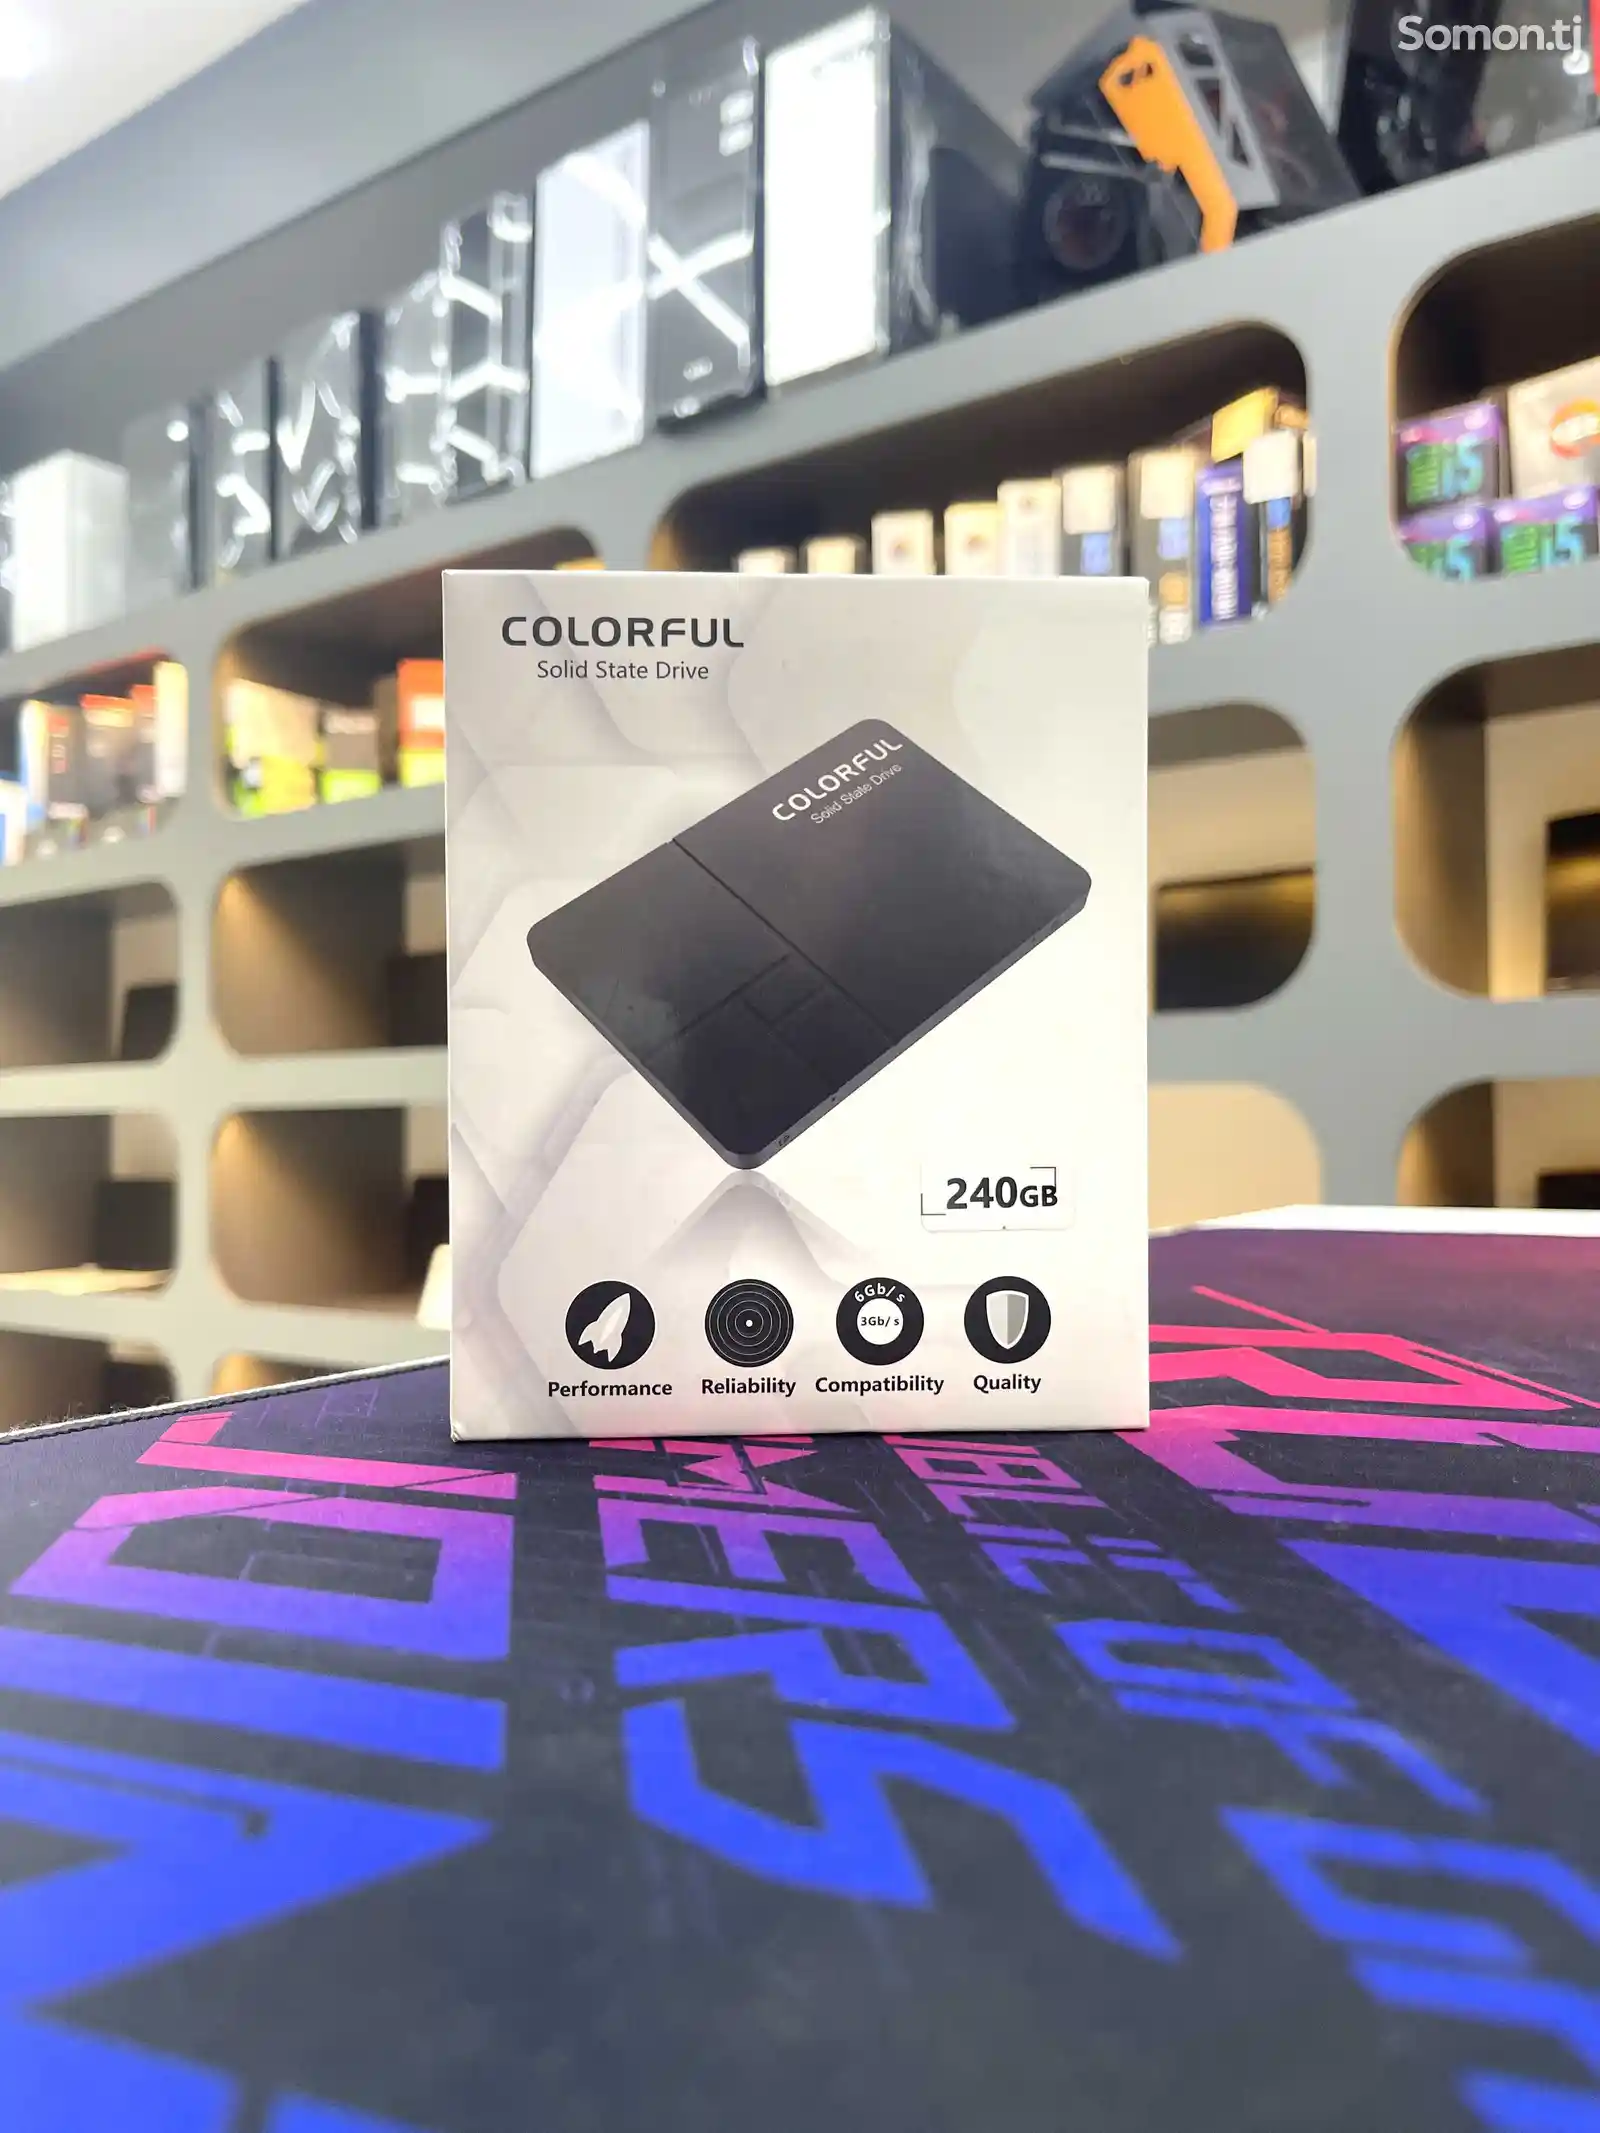 SSD Colorful 240GB